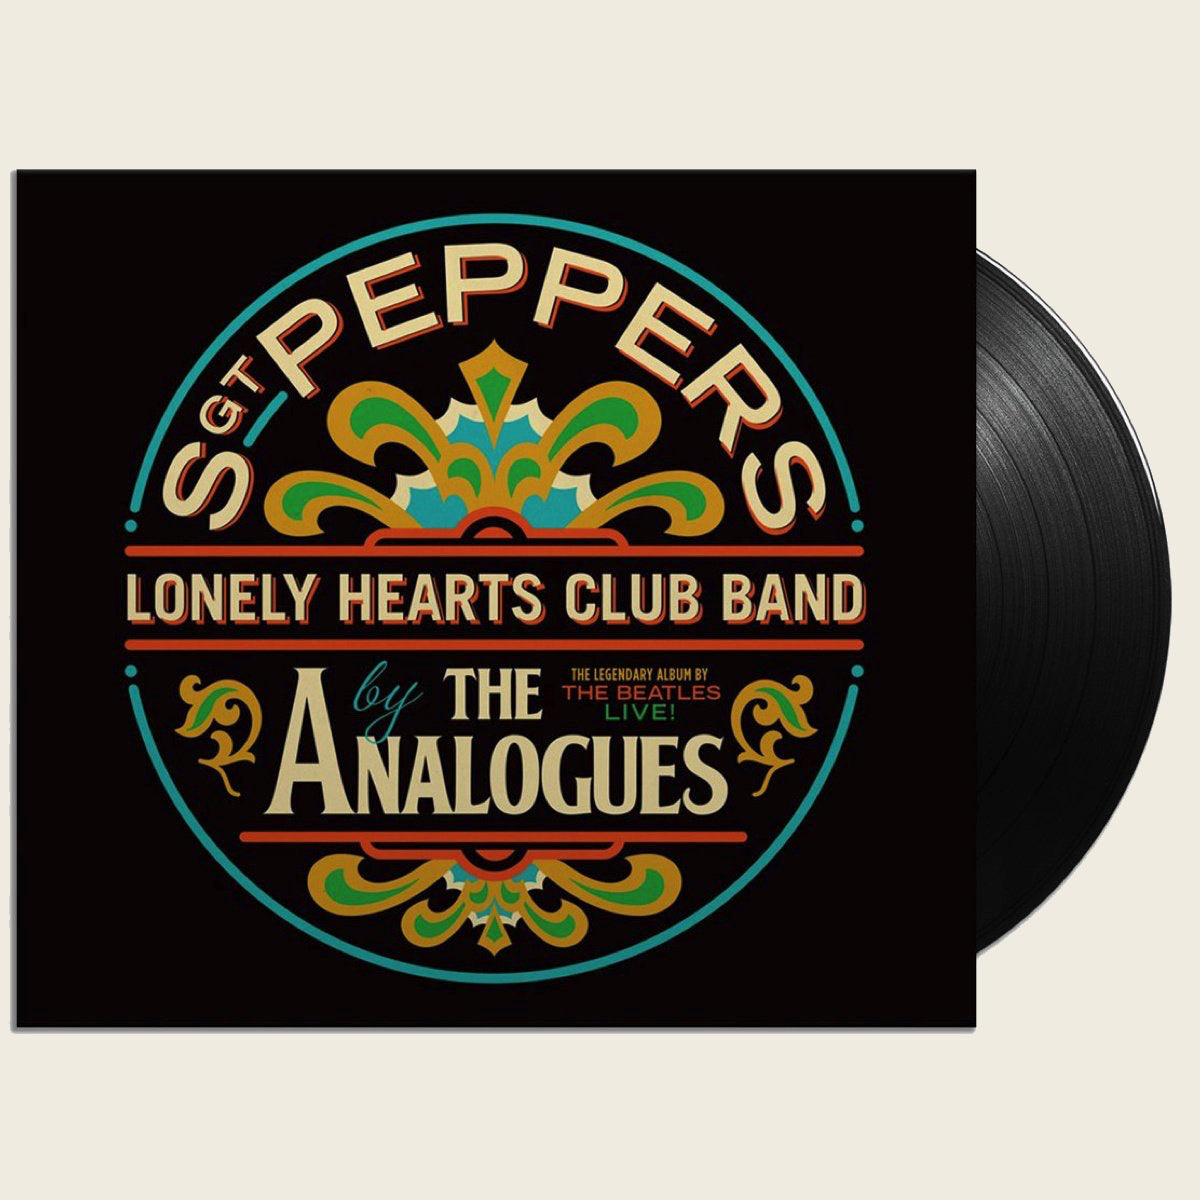   Bewerken The Analogues | LP - Sgt. Pepper's Lonely Hearts Club Band Live